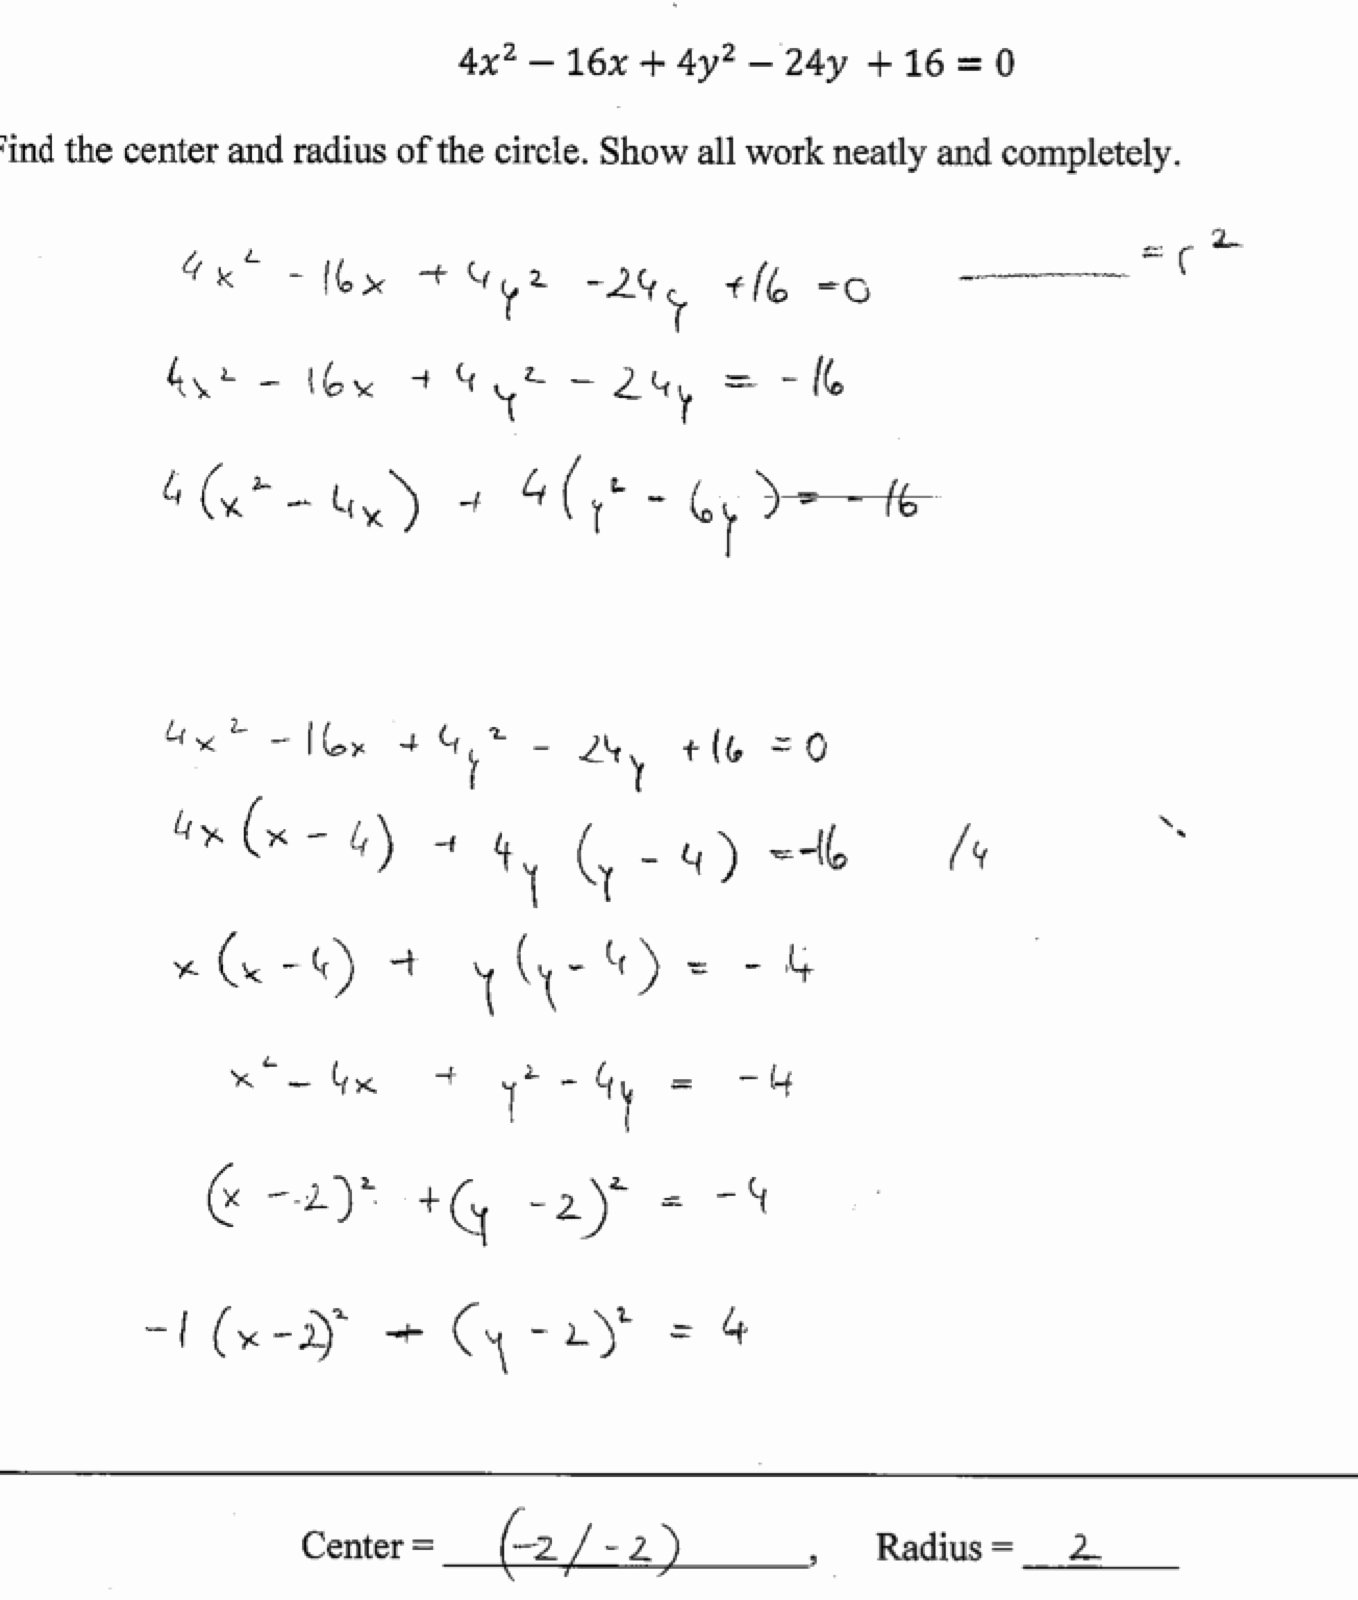 Completing the Square Worksheet Inspirational Plete the Square for Center Radius 2